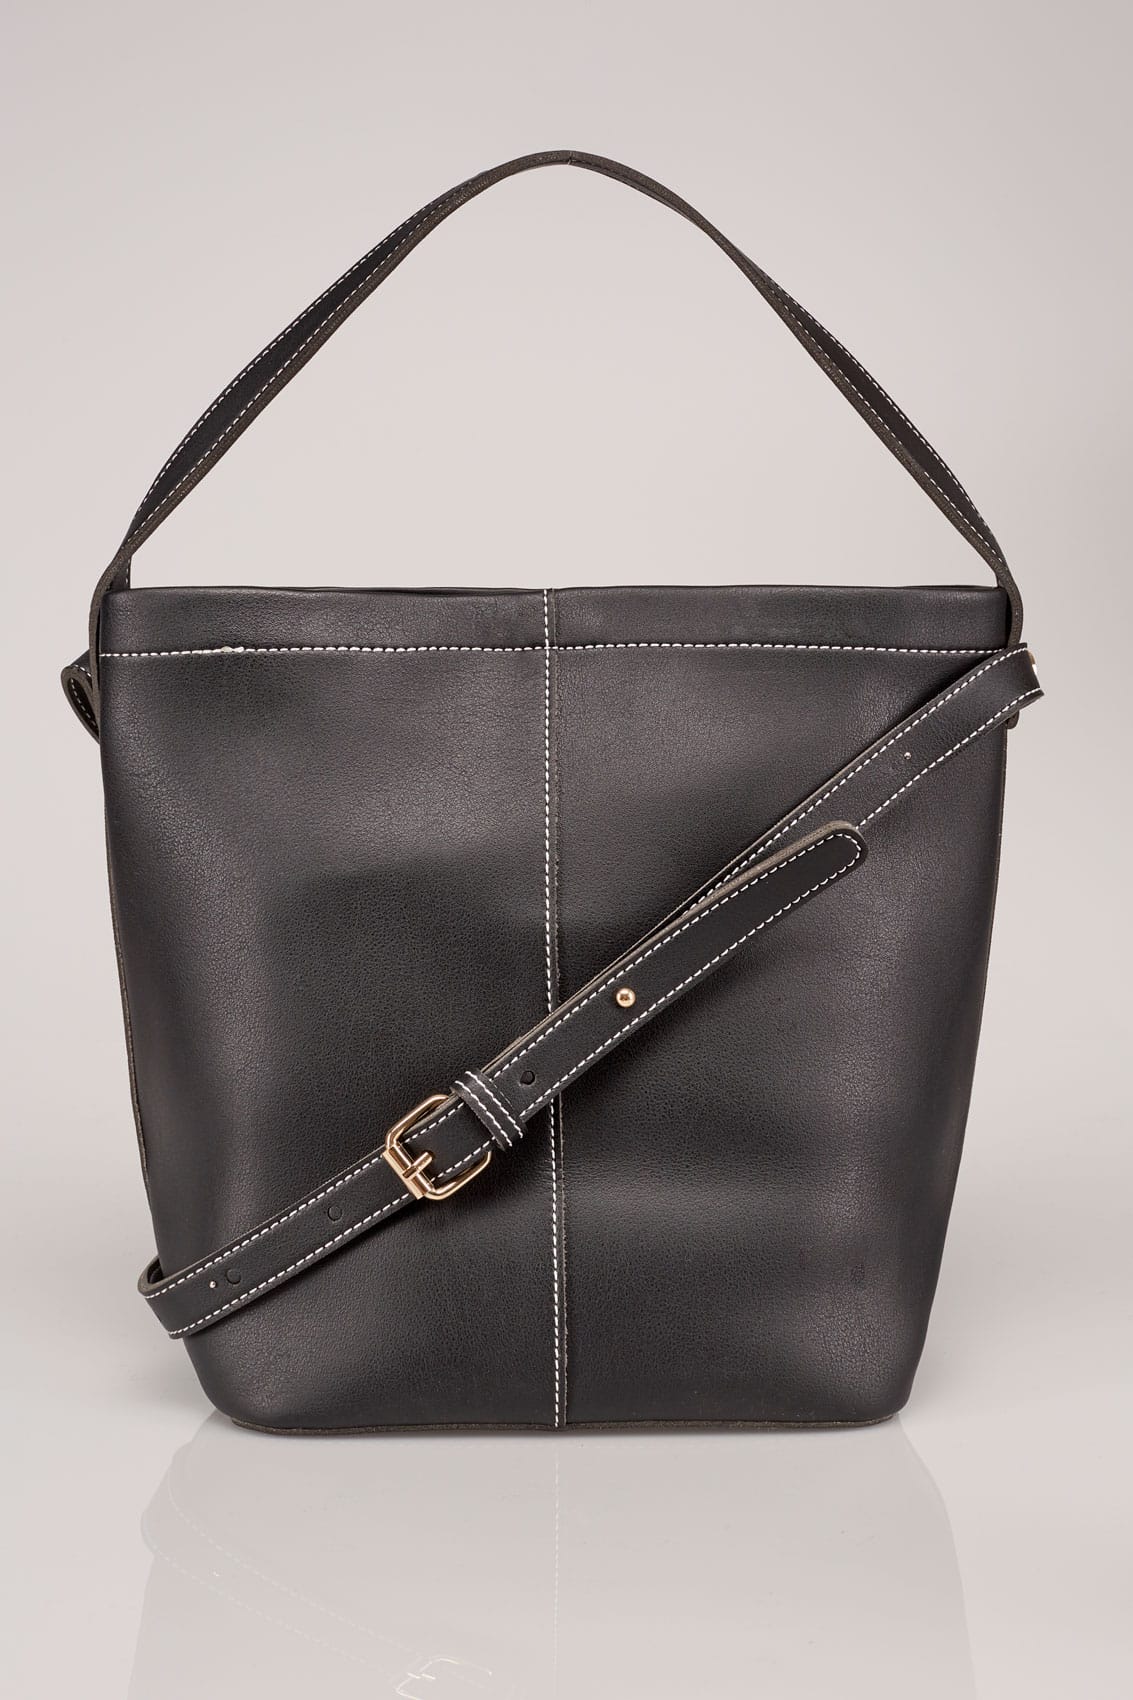 Black Bucket Bag With White Contrast Stitching